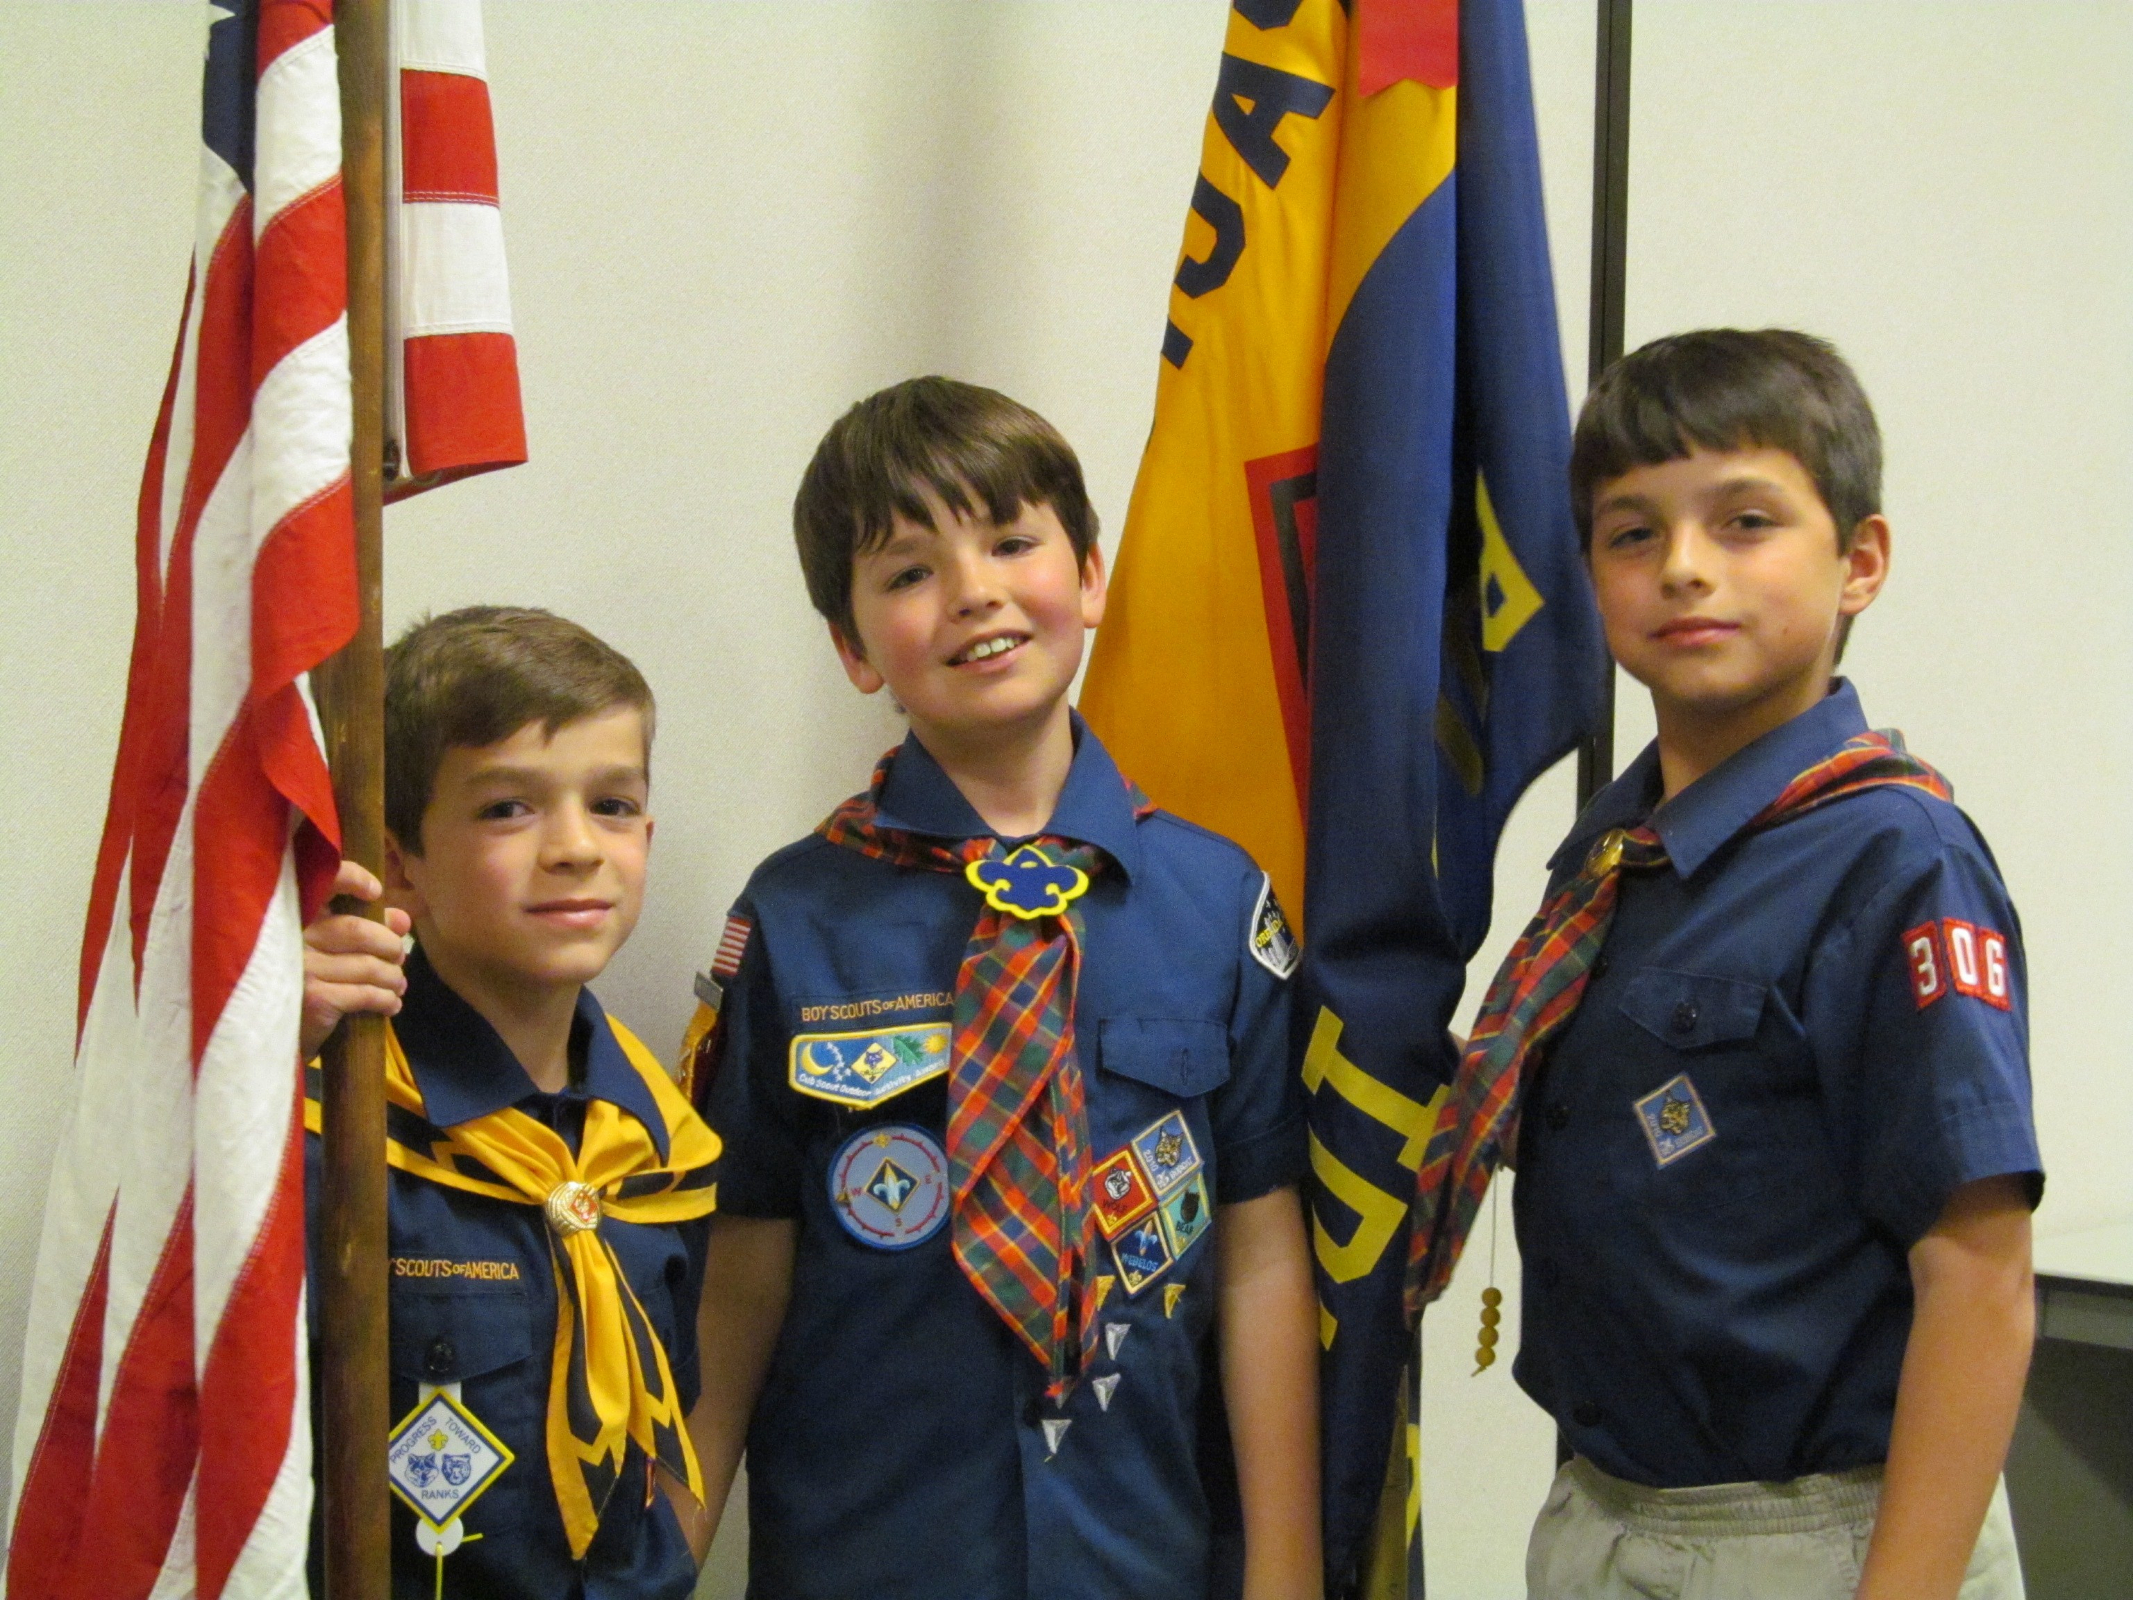 Boy Scouts of America Quotes. QuotesGram